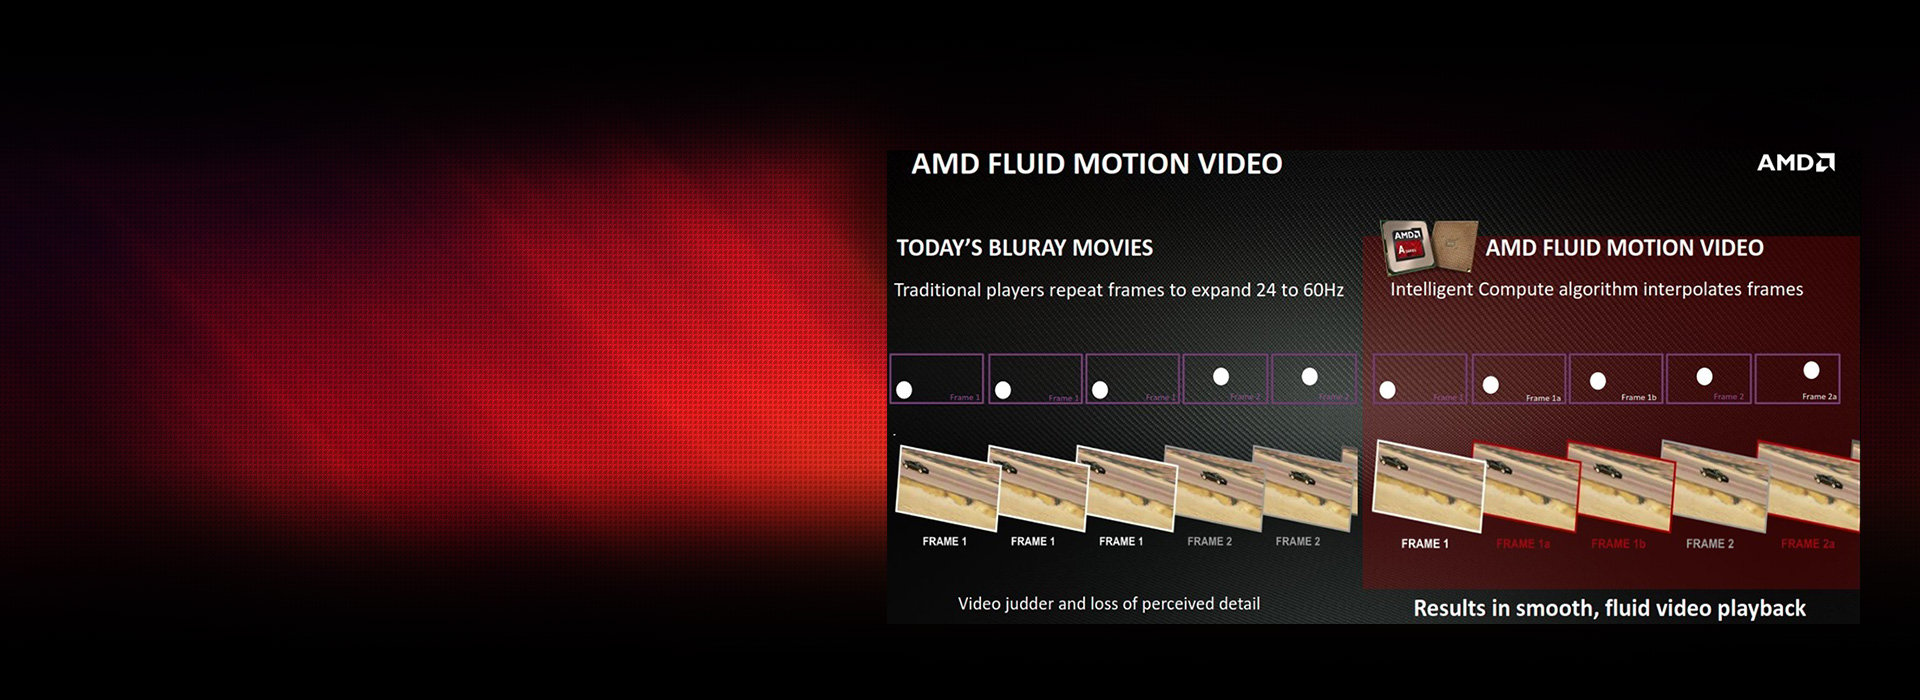 A comparison of frames between Blu-ray movies and AMD Fluid Motion Video, the text reads: Today's Bluray movies use traditional players that repeat framers to expand 24 to 60 hertz. This produces video judder and loss of perceived detail. AMD Fluid Motion video uses an intelligent compute algorithm that interpolates frames. This results in smooth, fluid video playback.